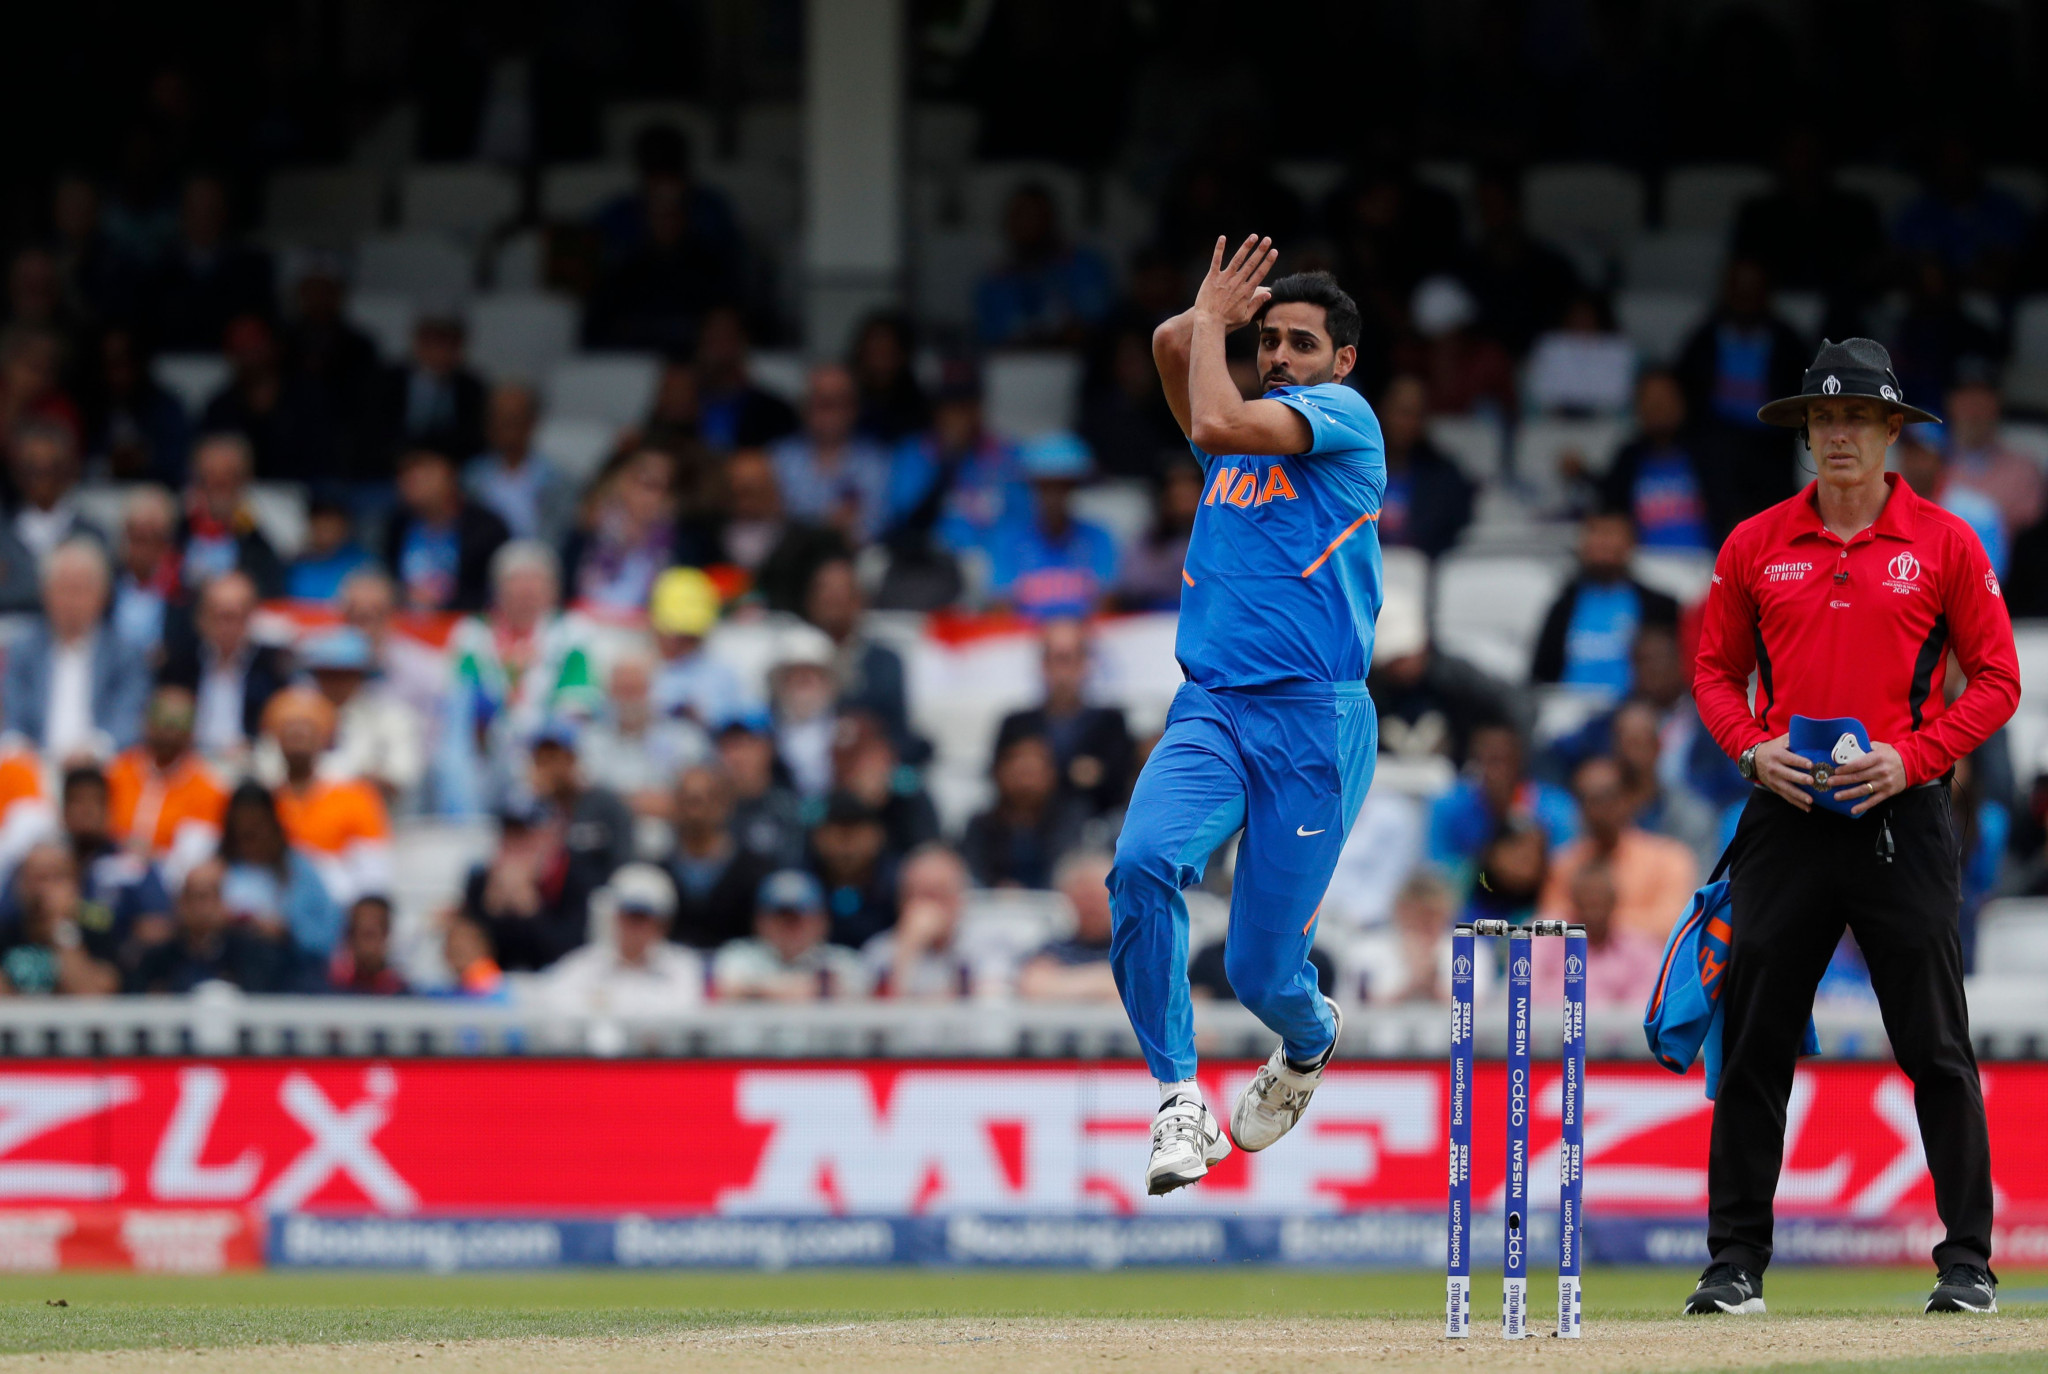 Bhuvneshwar Kumar took two wickets in an over to slow Australia's momentum ©Getty Images